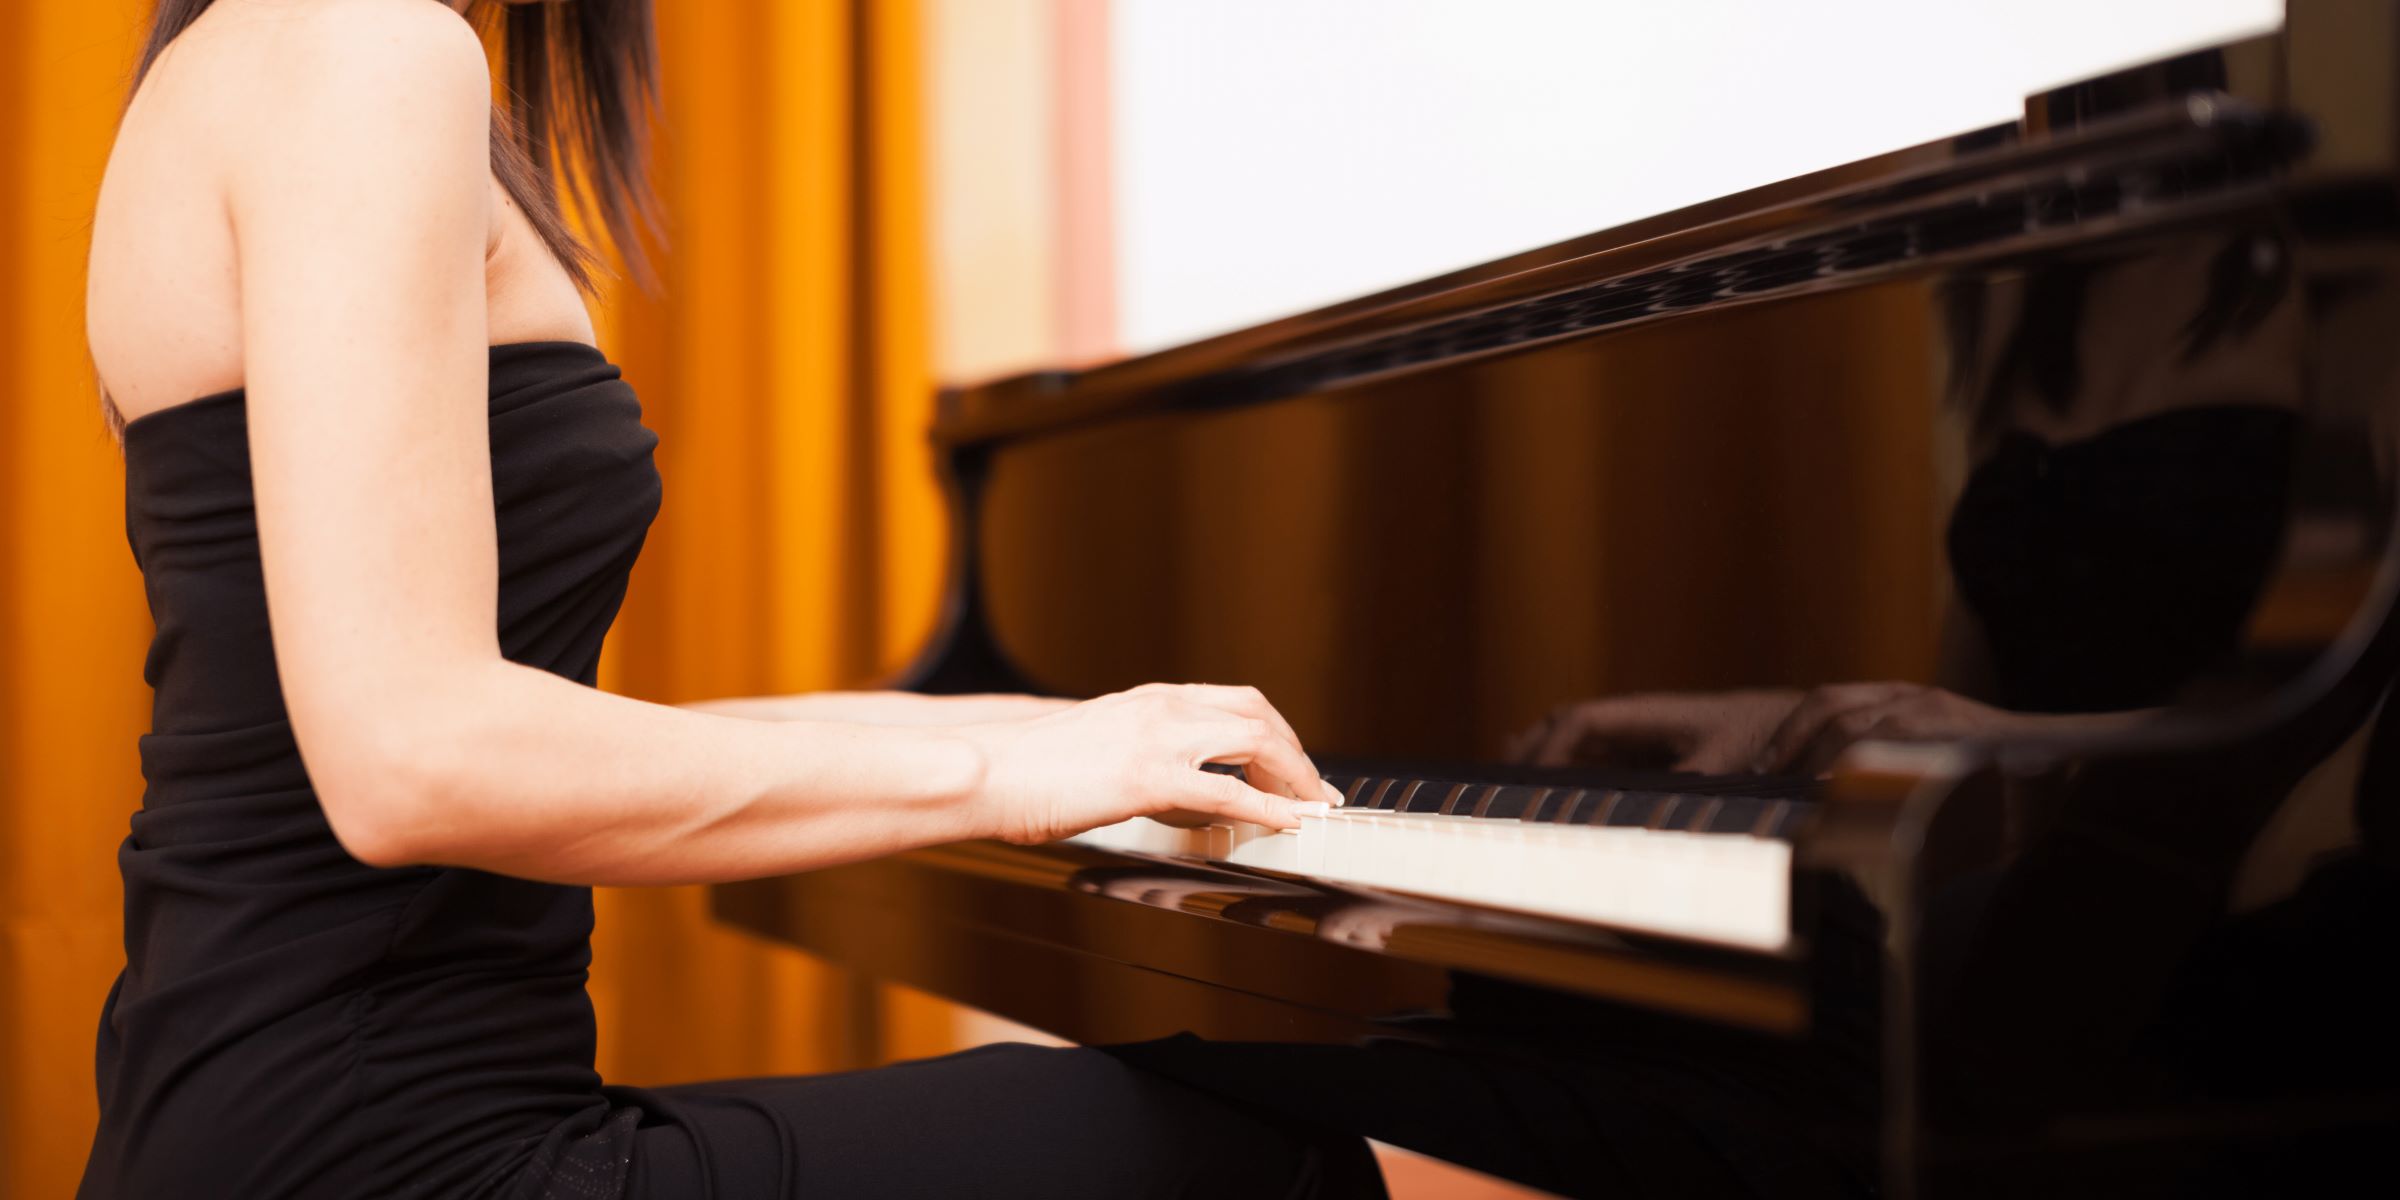 Which Famous Musician Sings And Plays Piano?